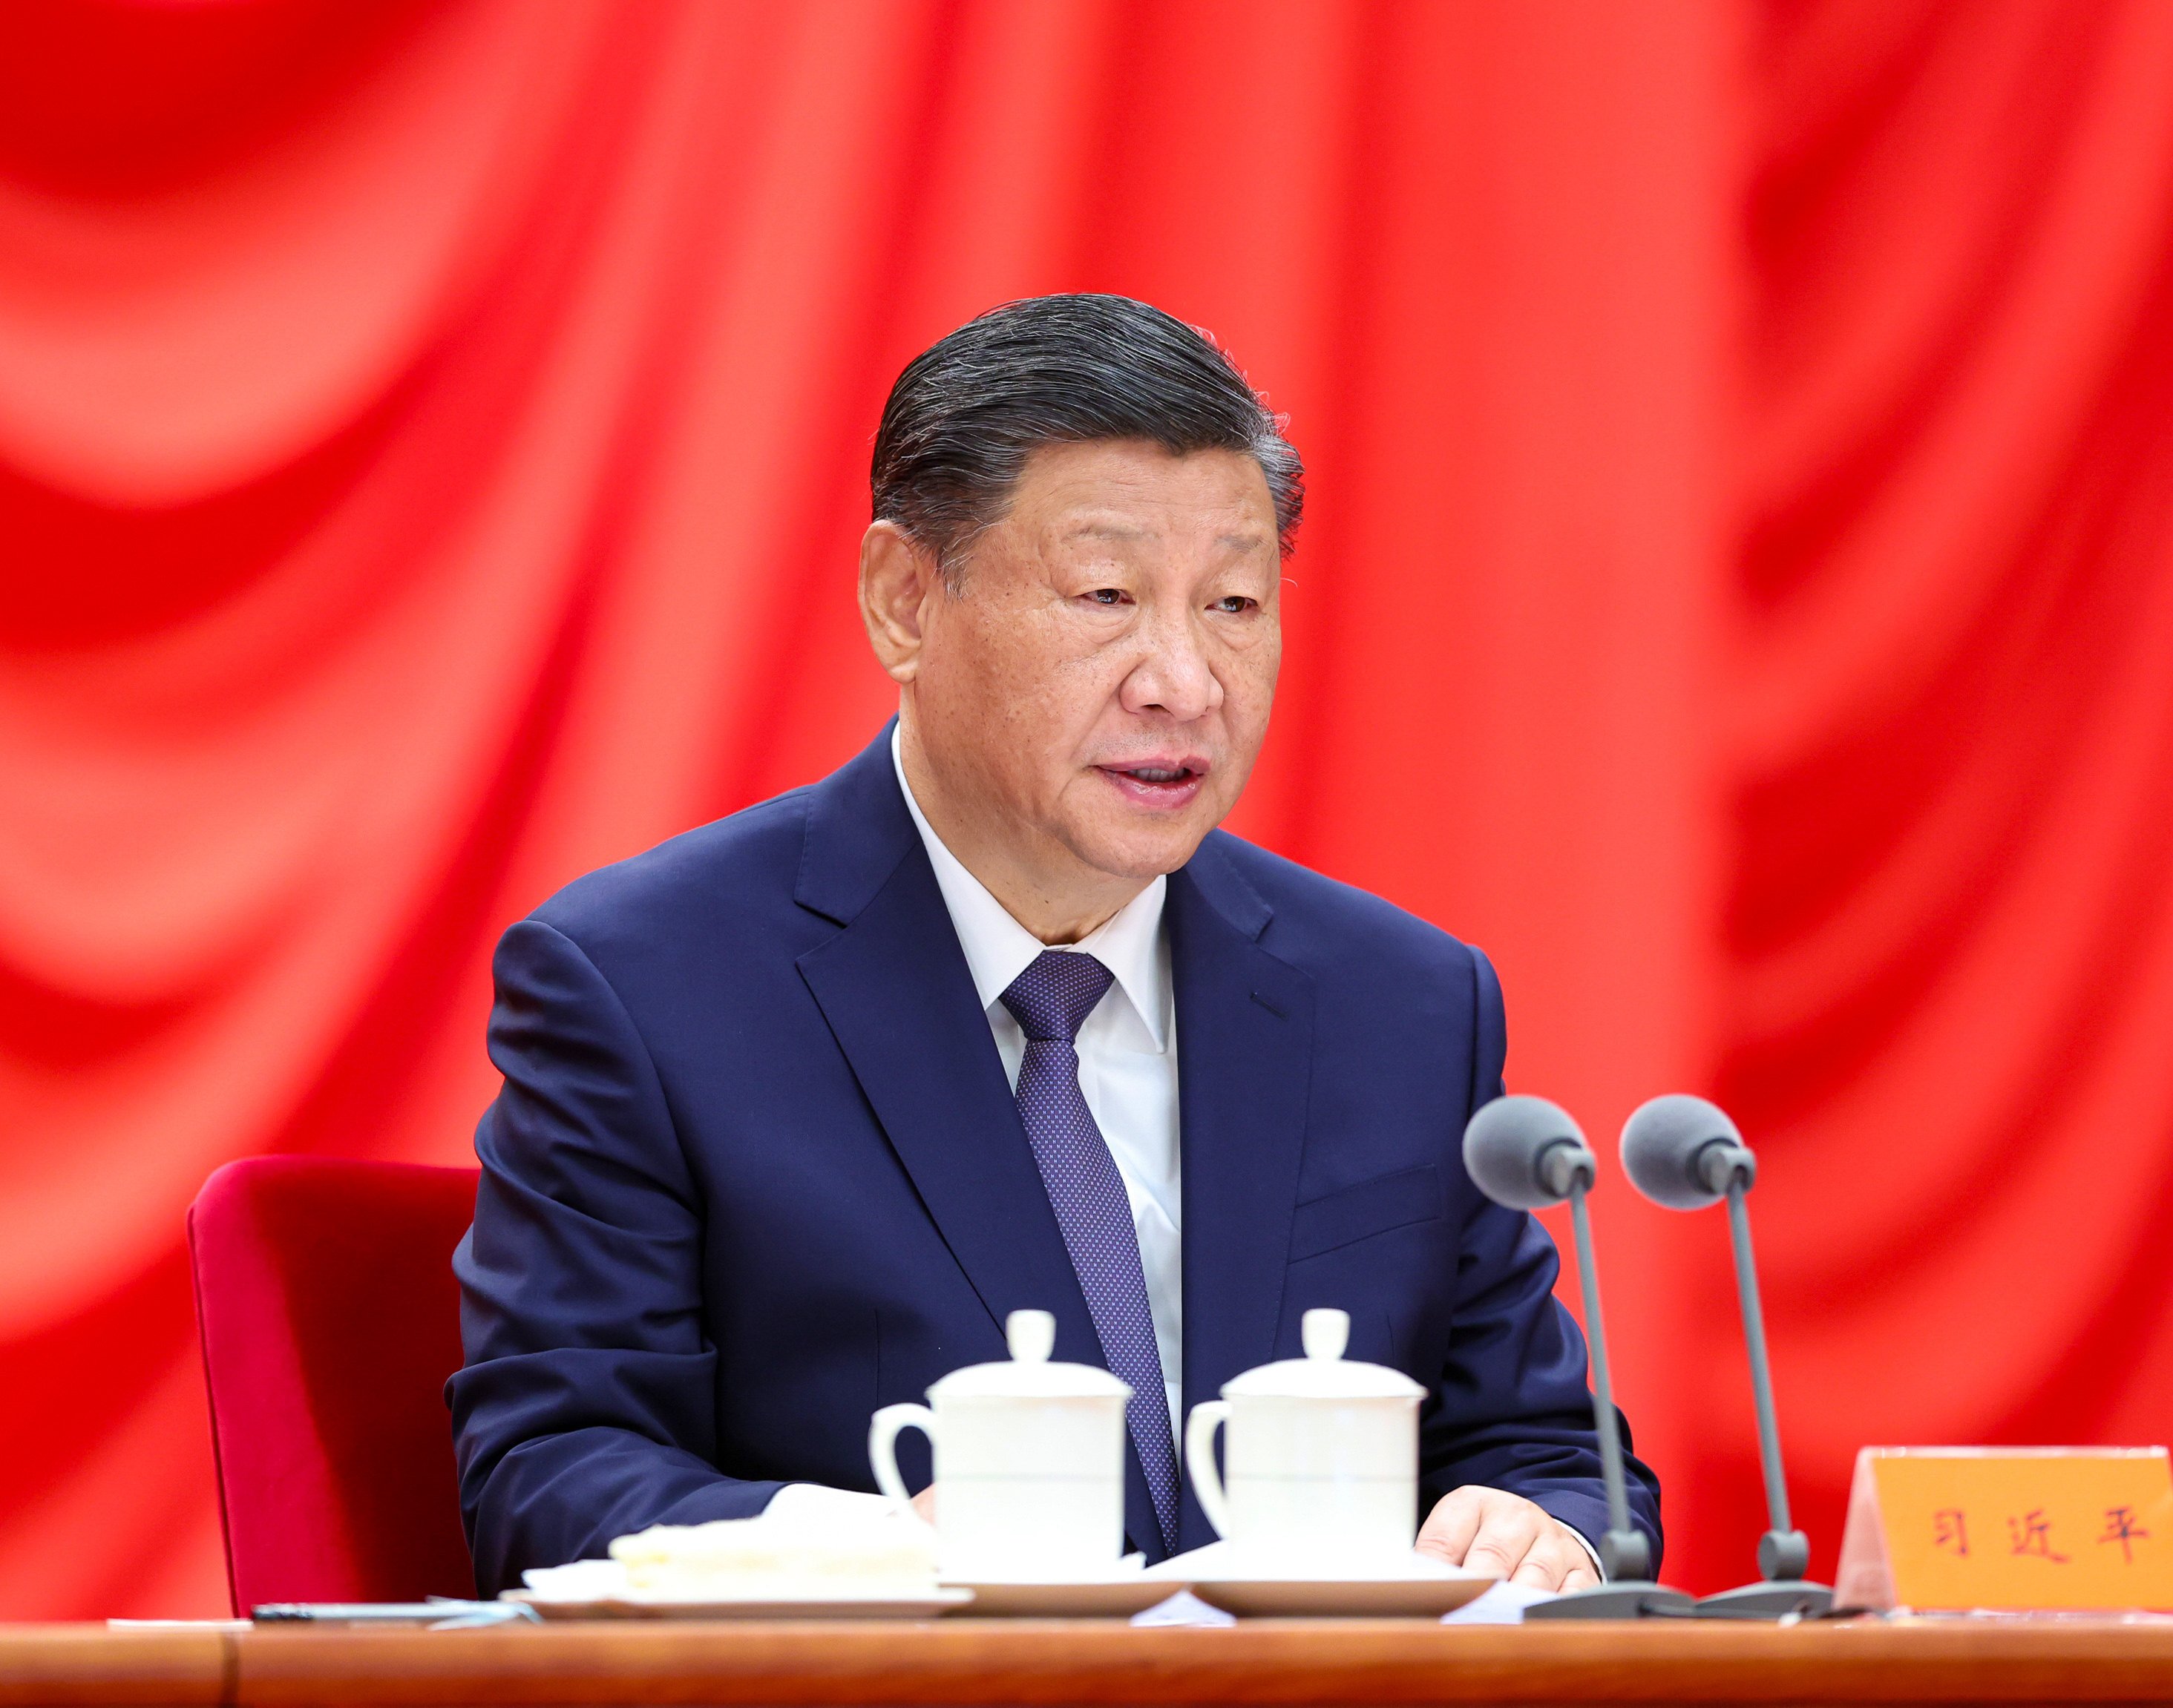 At a high-level conference, President Xi Jinping has laid out the path for China to become a “financial superpower”. Photo: Xinhua